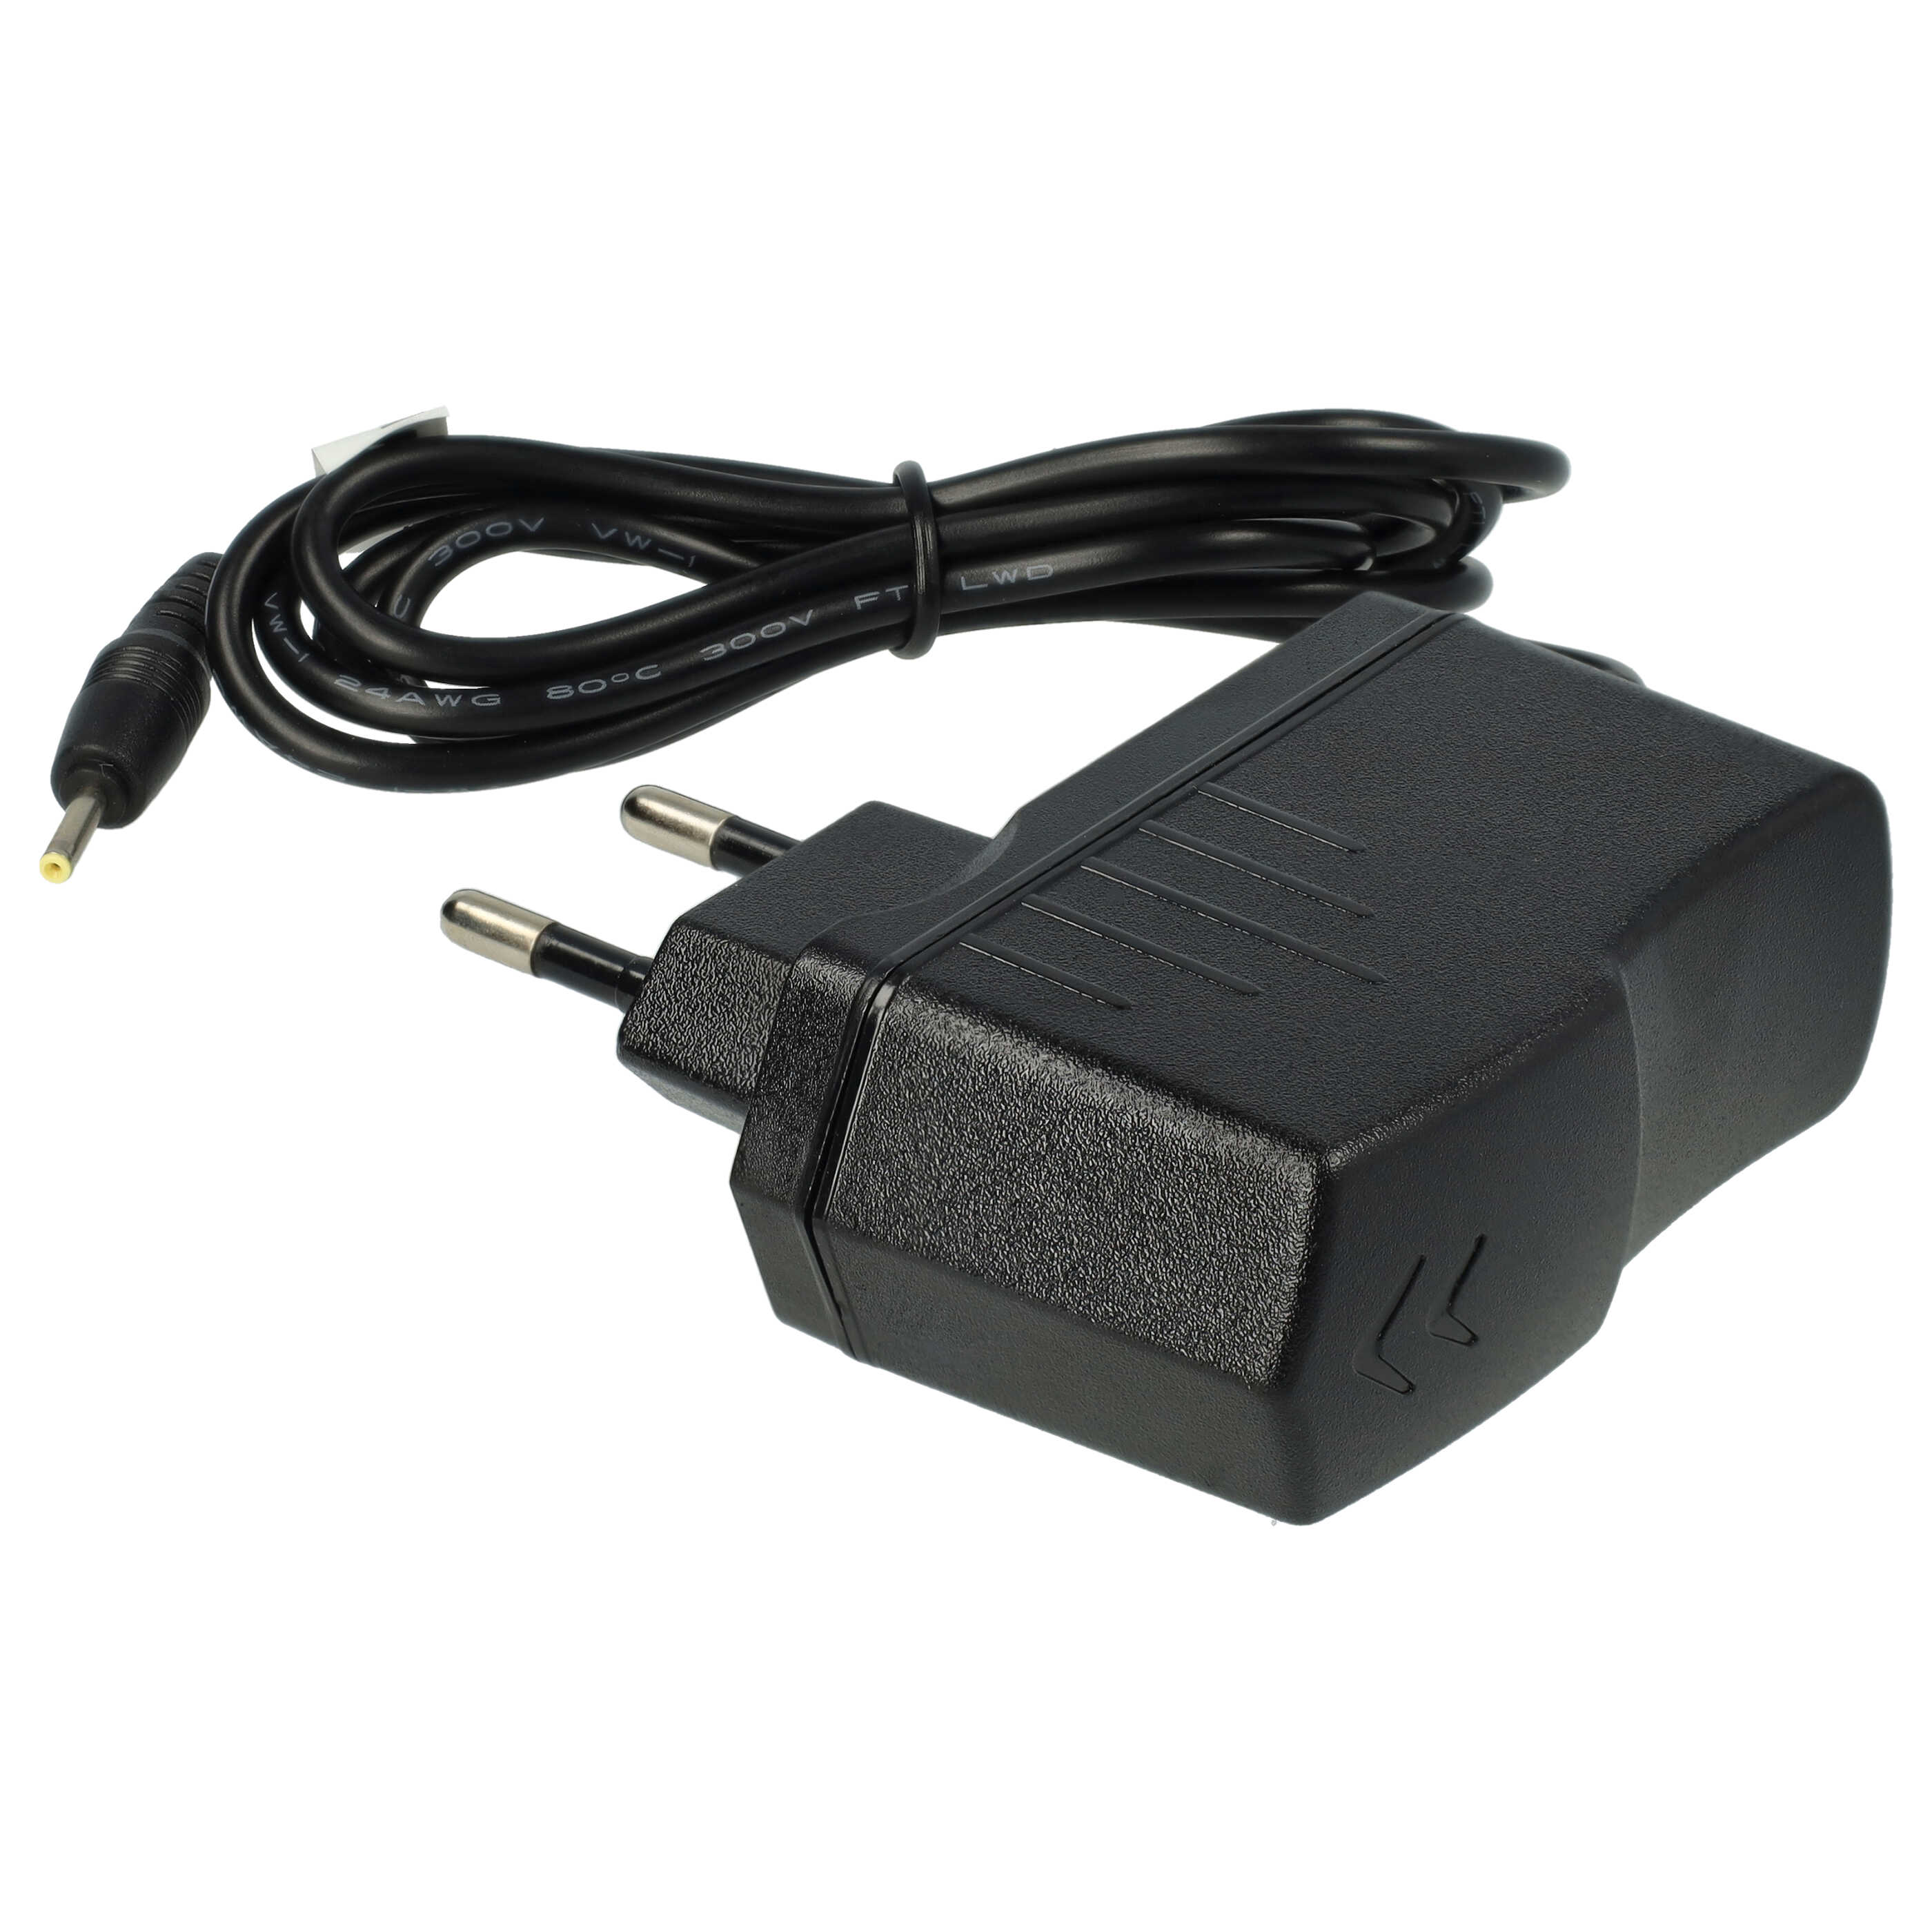 Mains Power Adapter replaces YY-520 for Tablet etc. - 123 cm